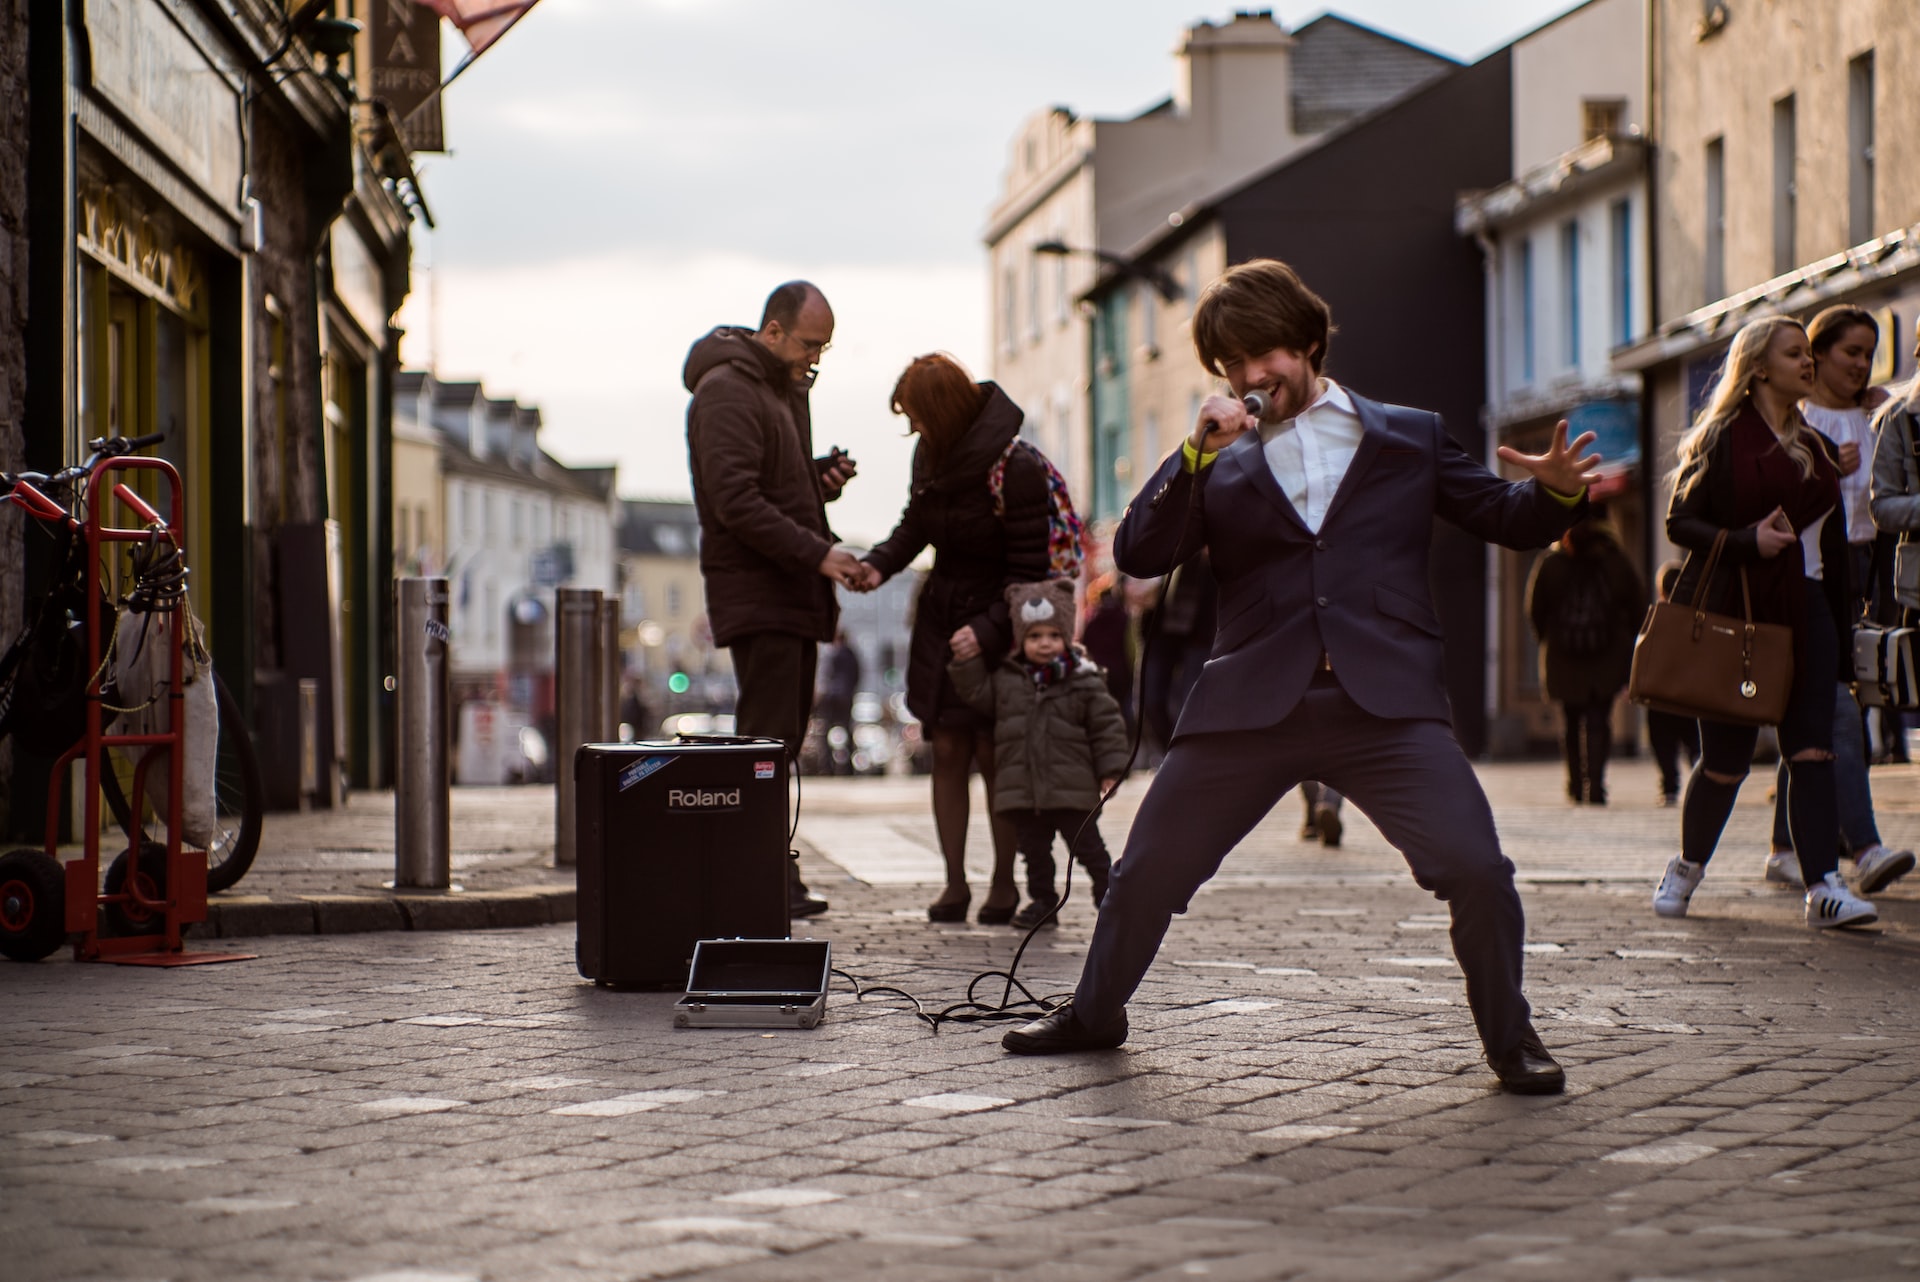 A street performer in Galway, one of the most exciting cities in Ireland (photo: Kelan Chad)